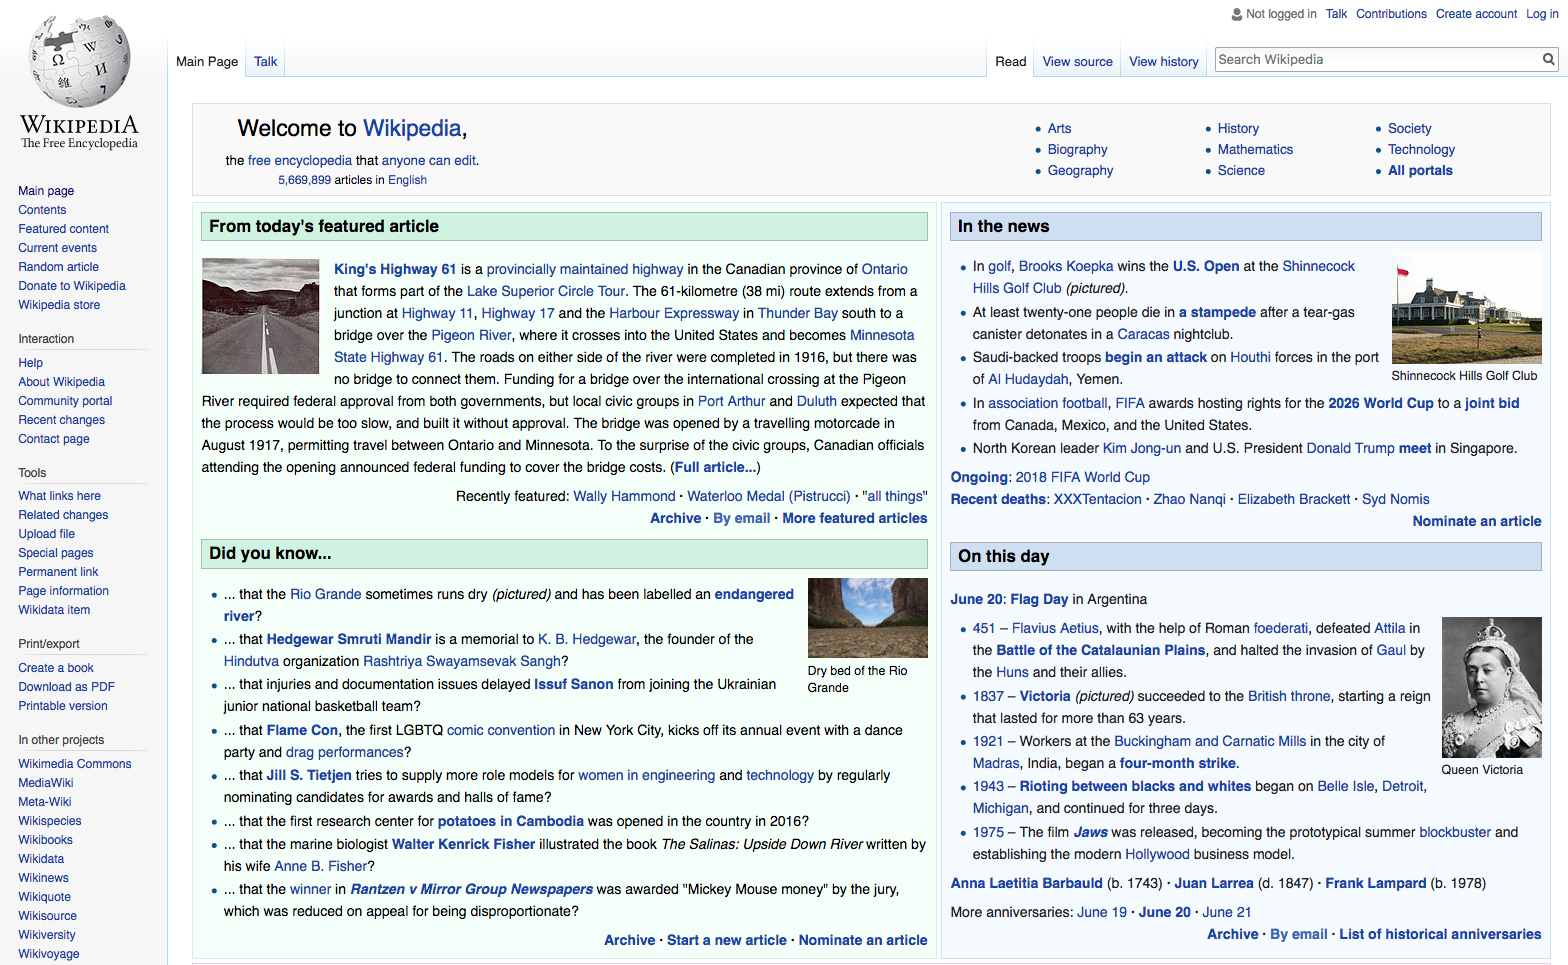 Image of a Wikipedia homepage.